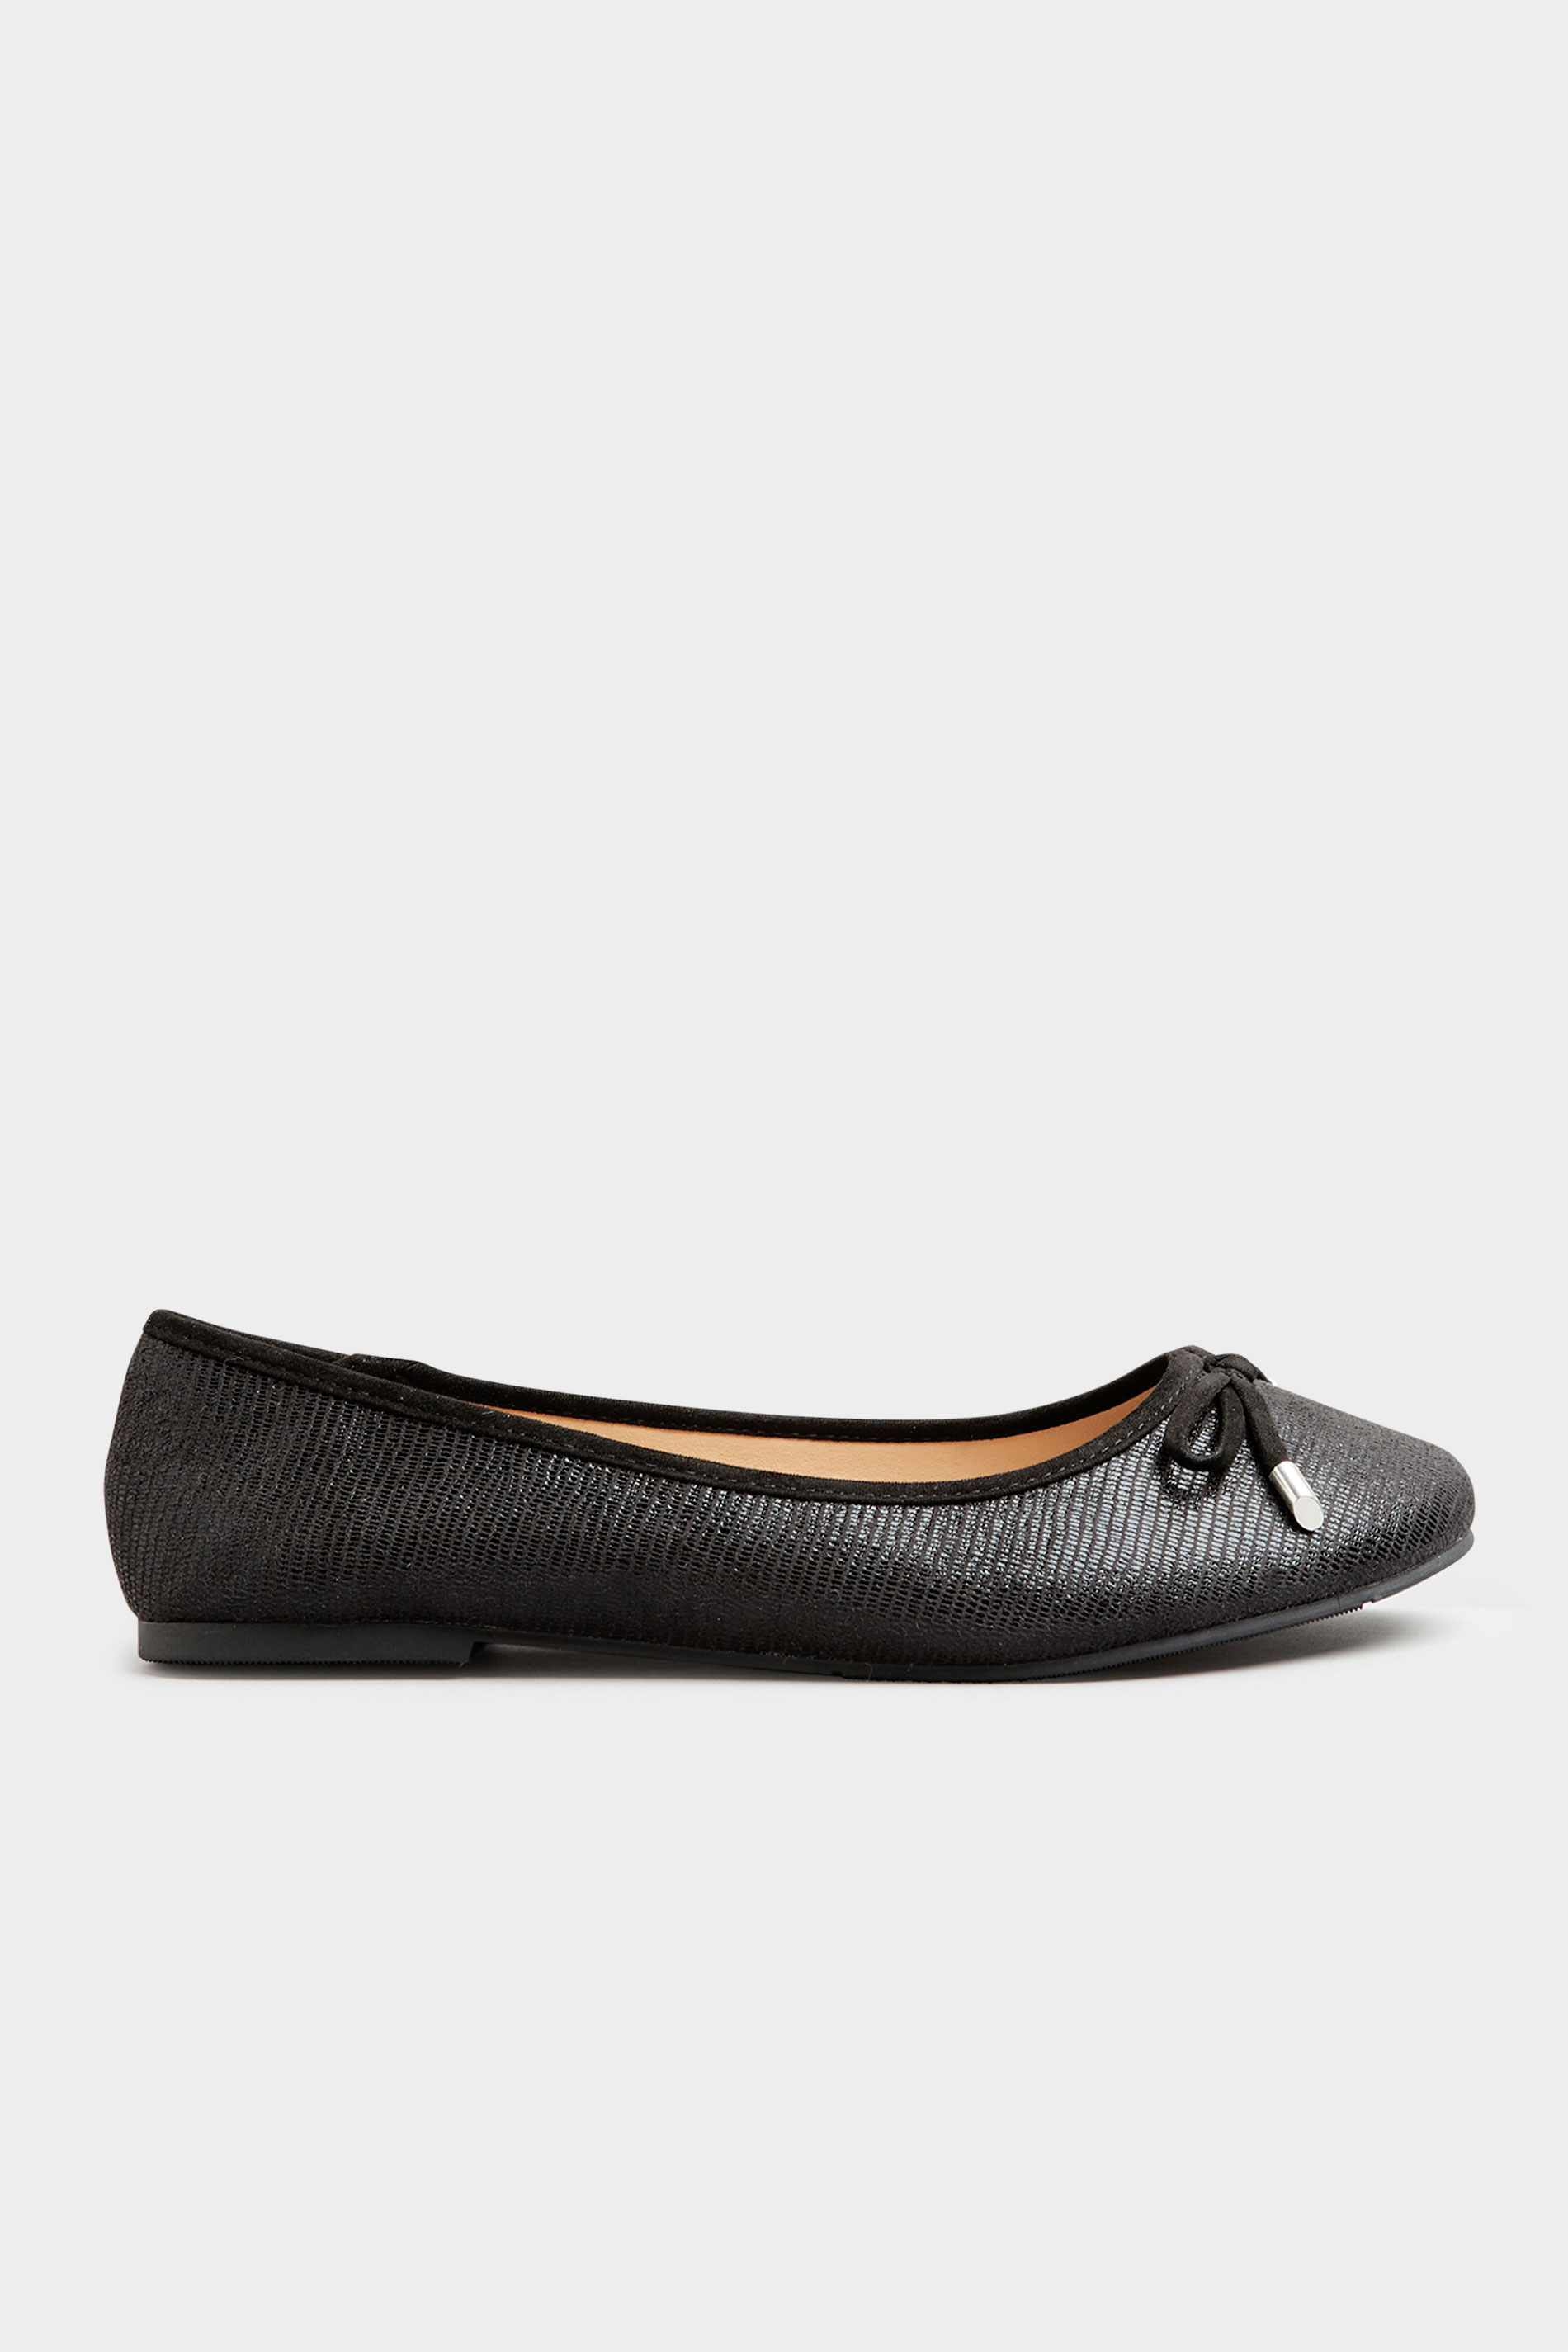 Women/'s Black Ballerina Pumps in Extra Wide Fit Yours